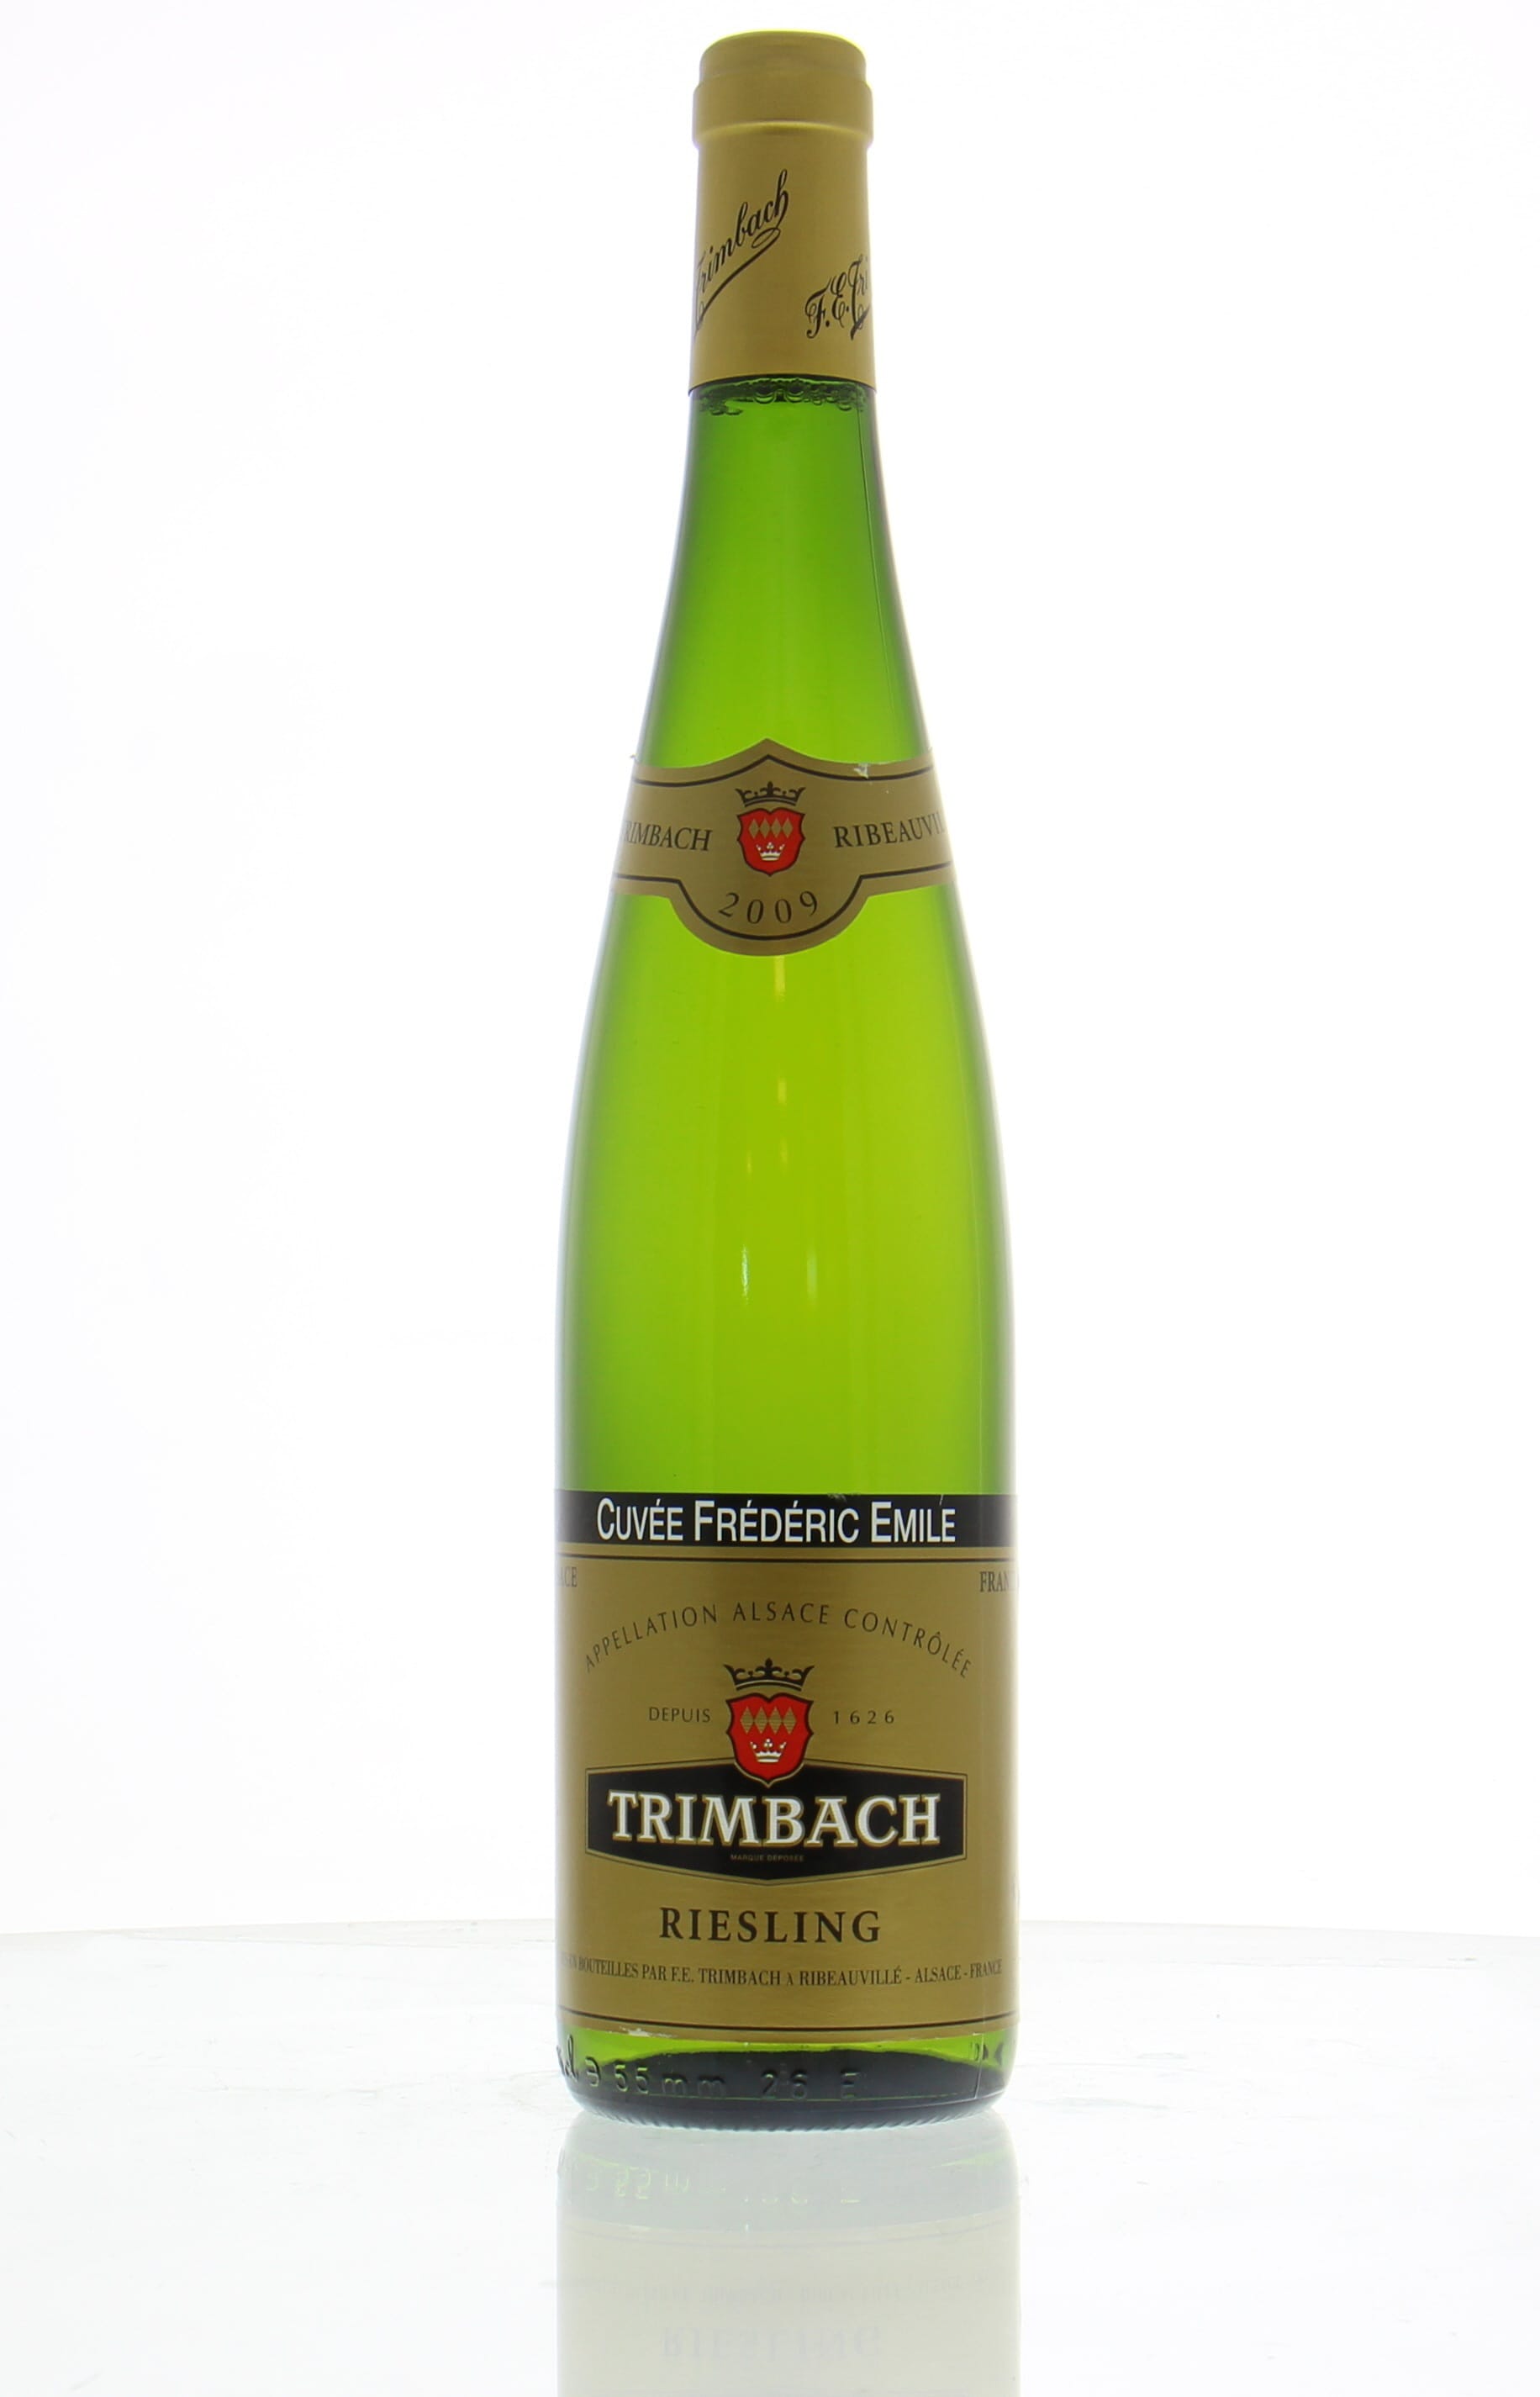 Trimbach - Riesling Cuvee Frederic Emile 2009 Perfect